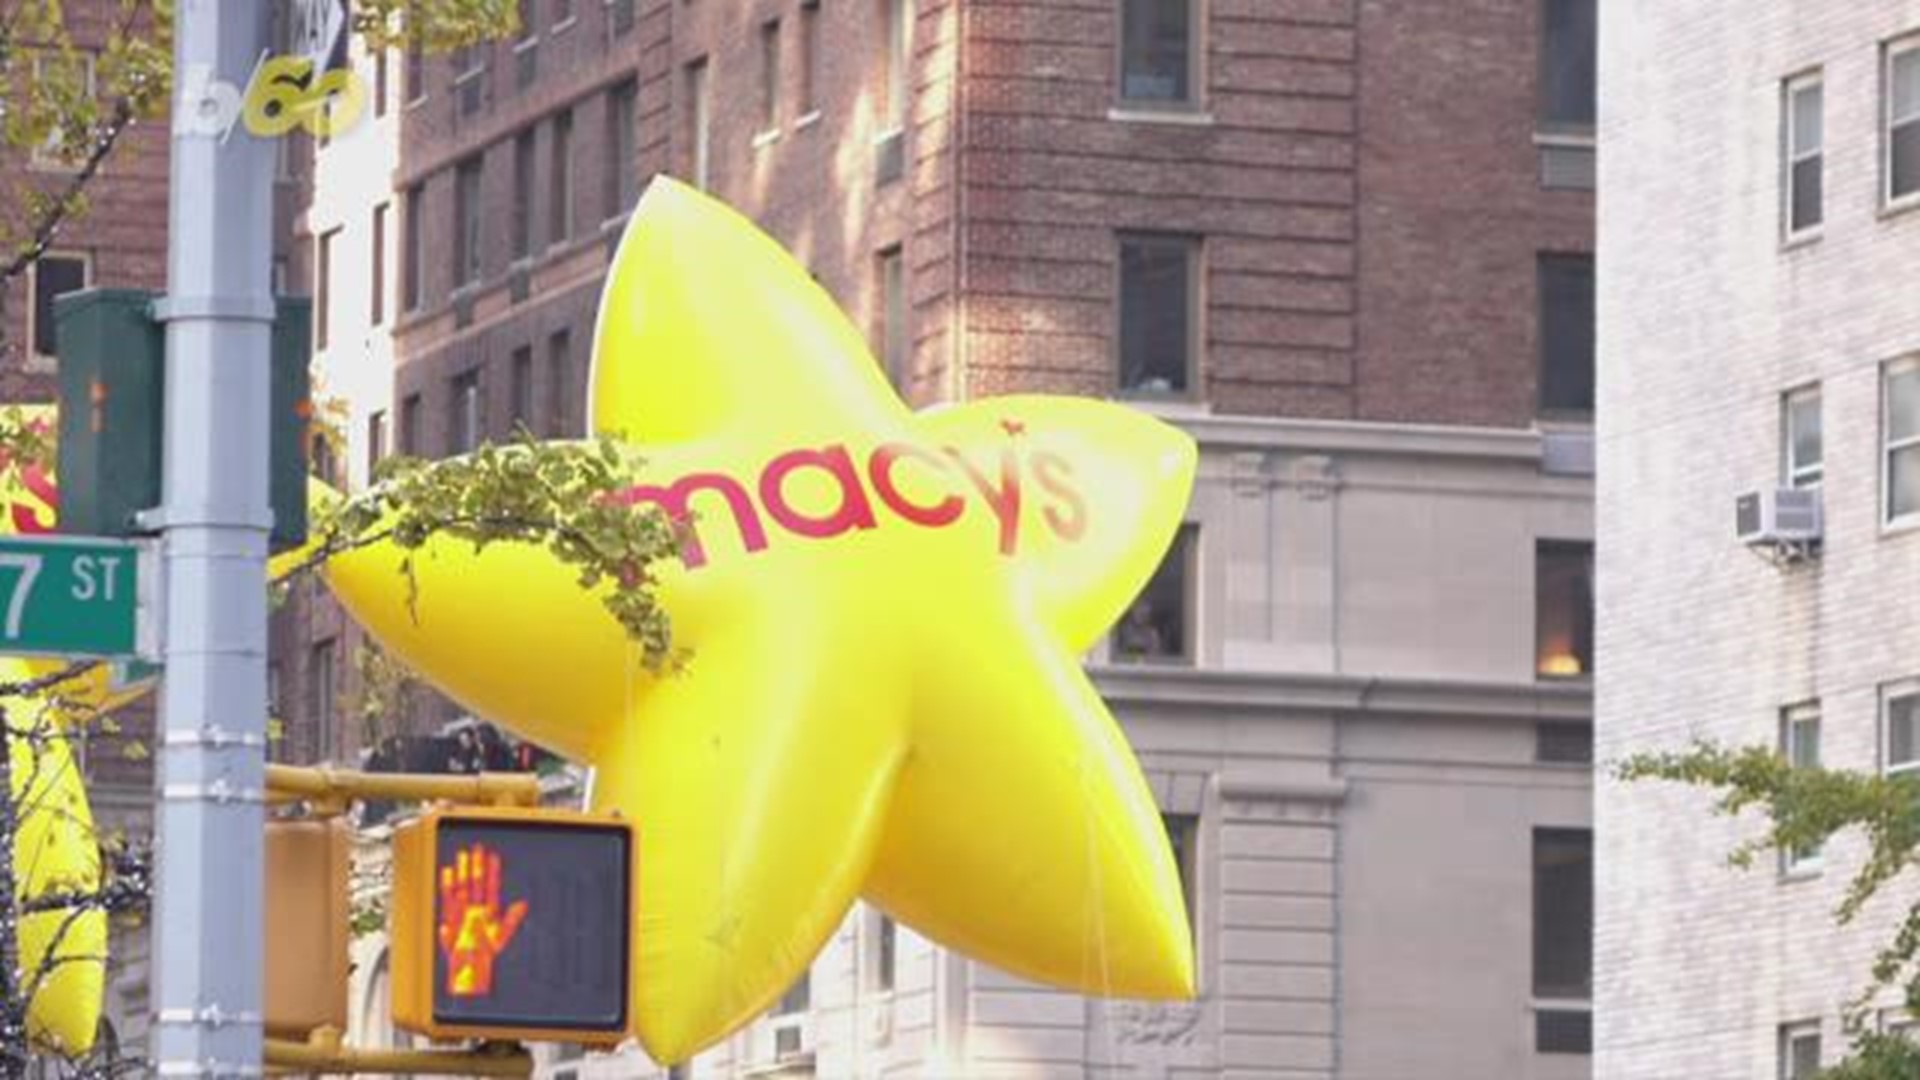 Macy's is trying out smaller stores, along with Kohl's and Nordstrom. Elizabeth Keatinge tells us about their downsizing.